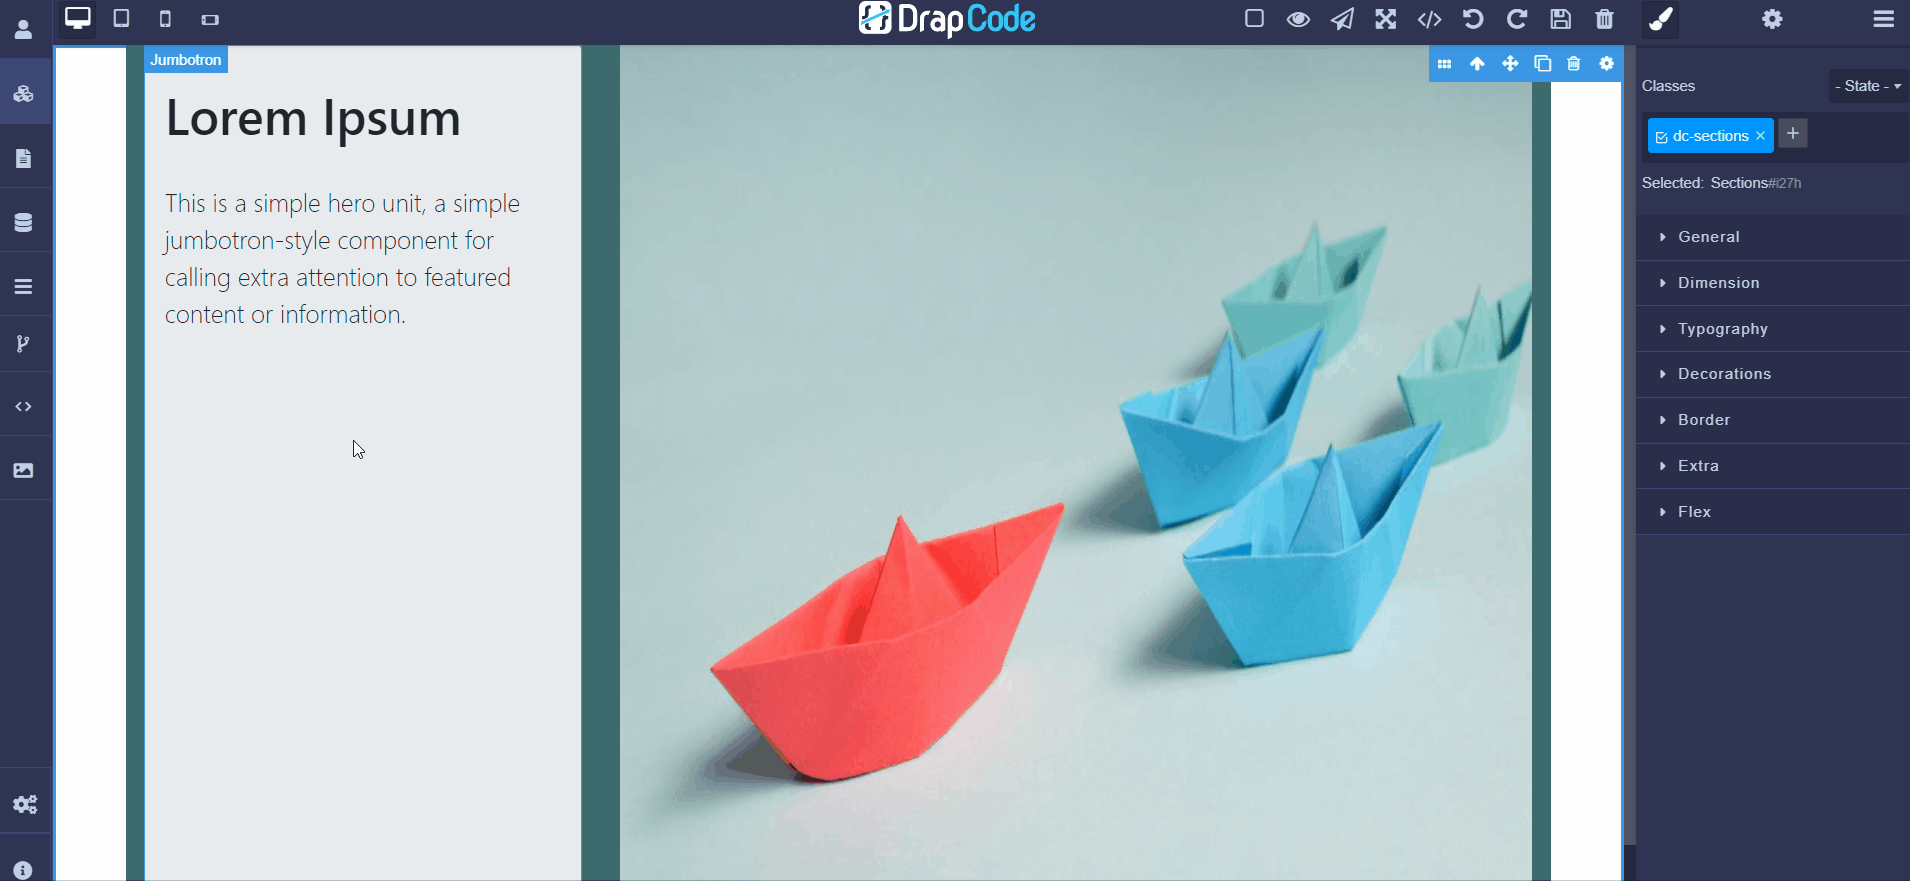 Find pricing, reviews and other details about DrapCode